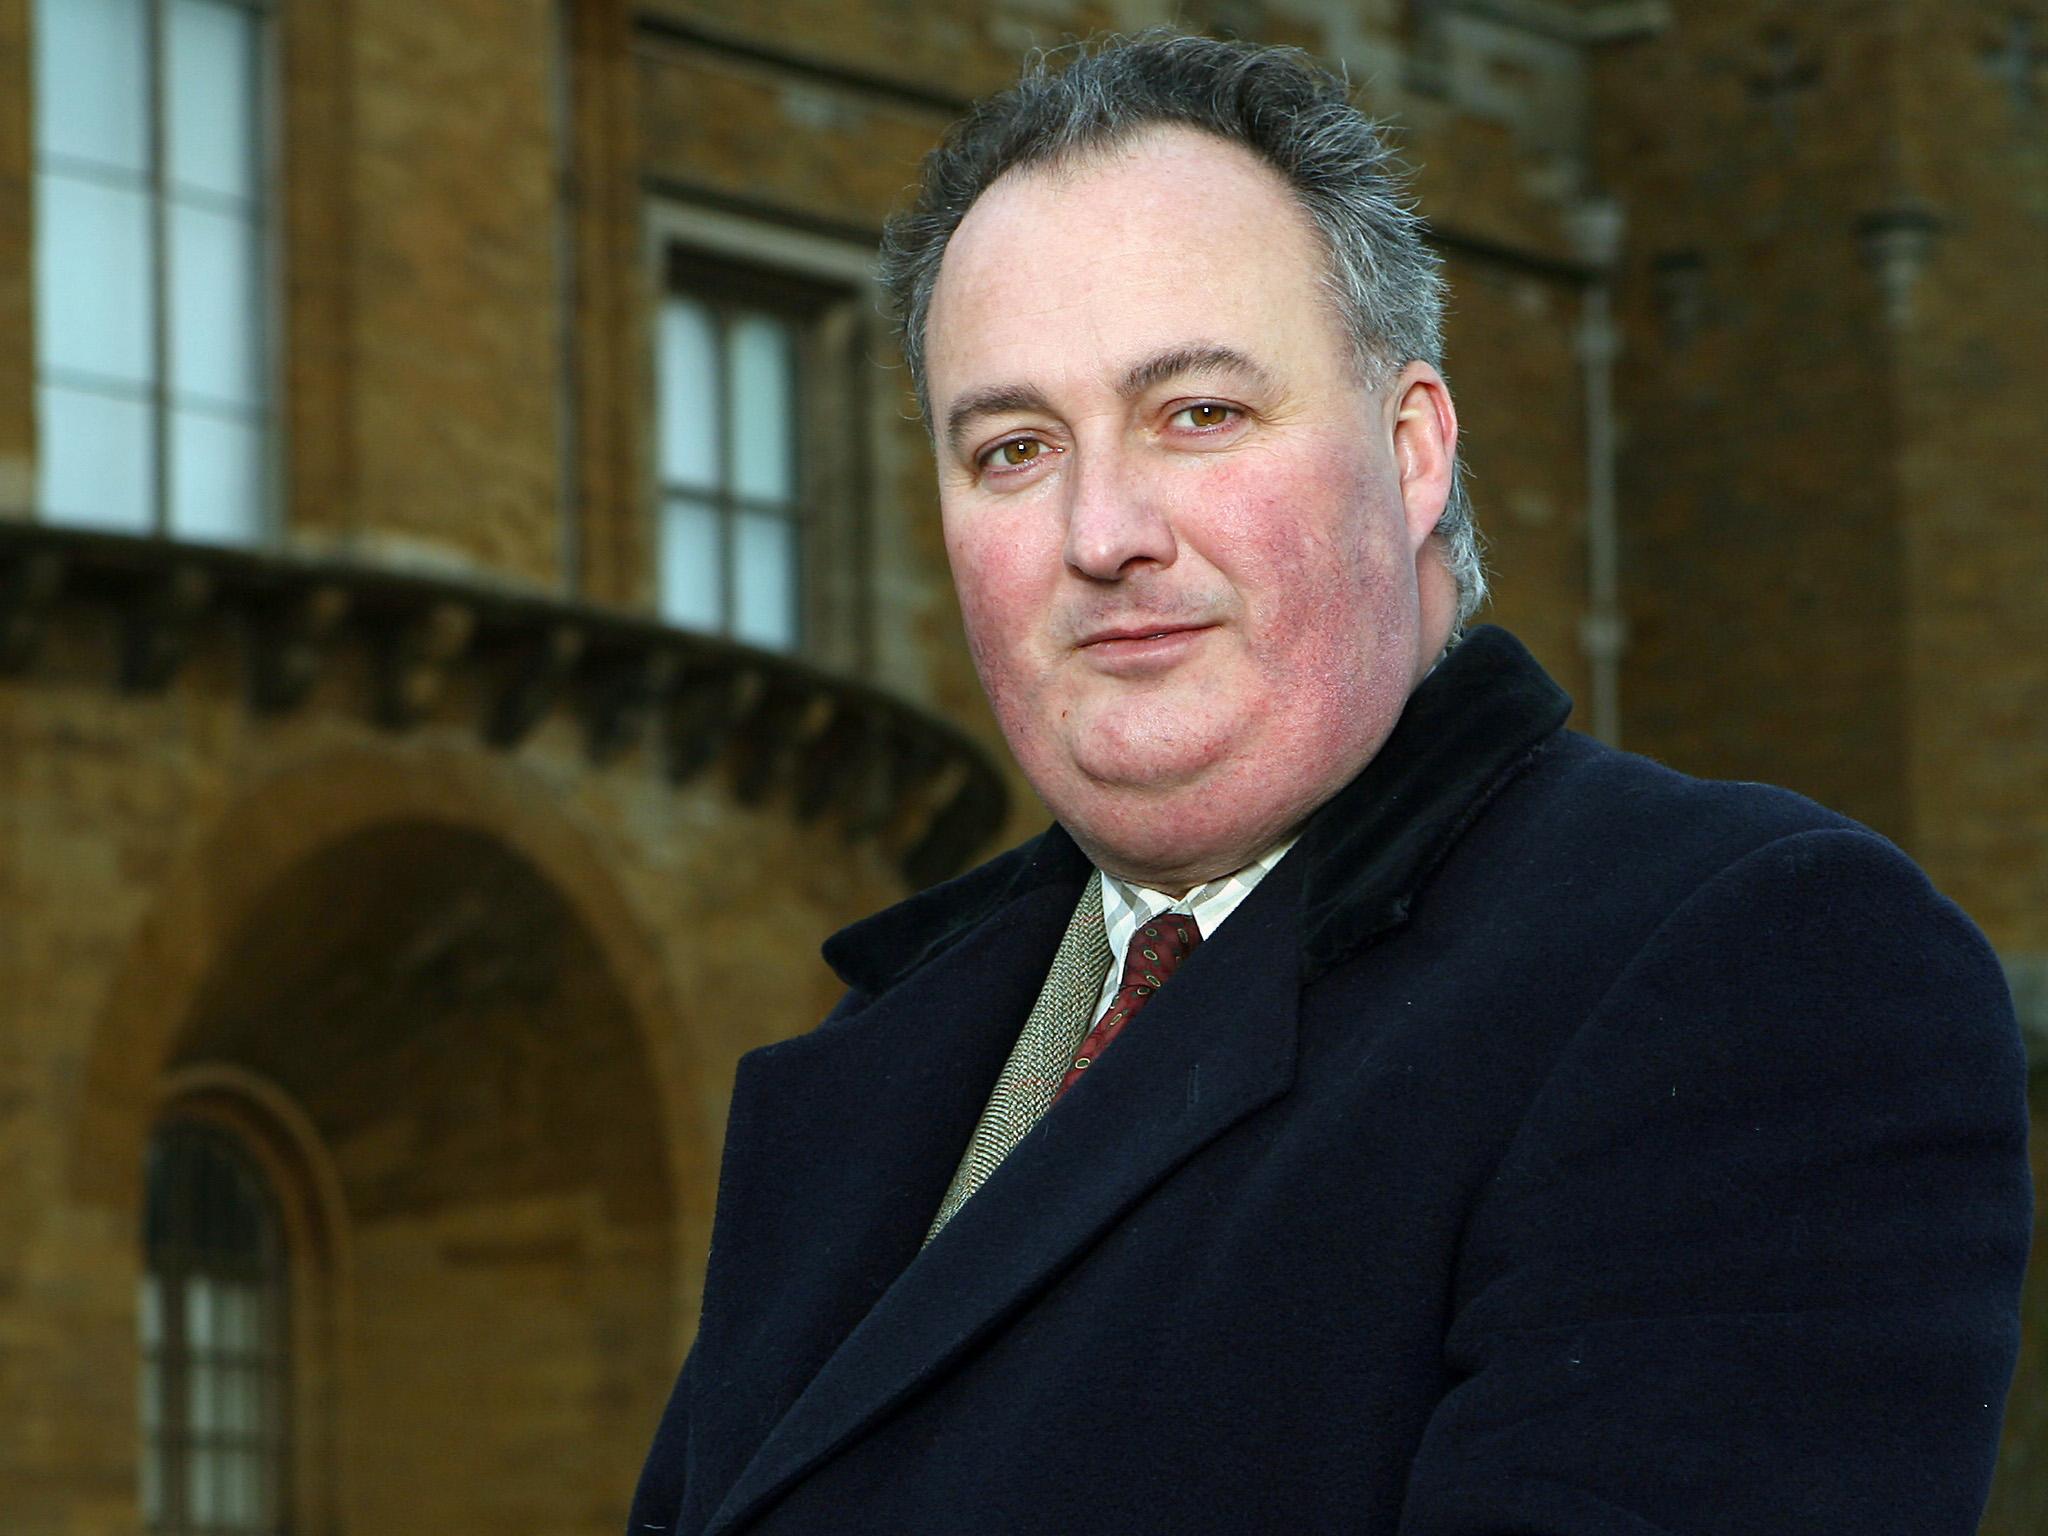 David Manners, the 11th Duke of Rutland, at home at Belvoir Castle